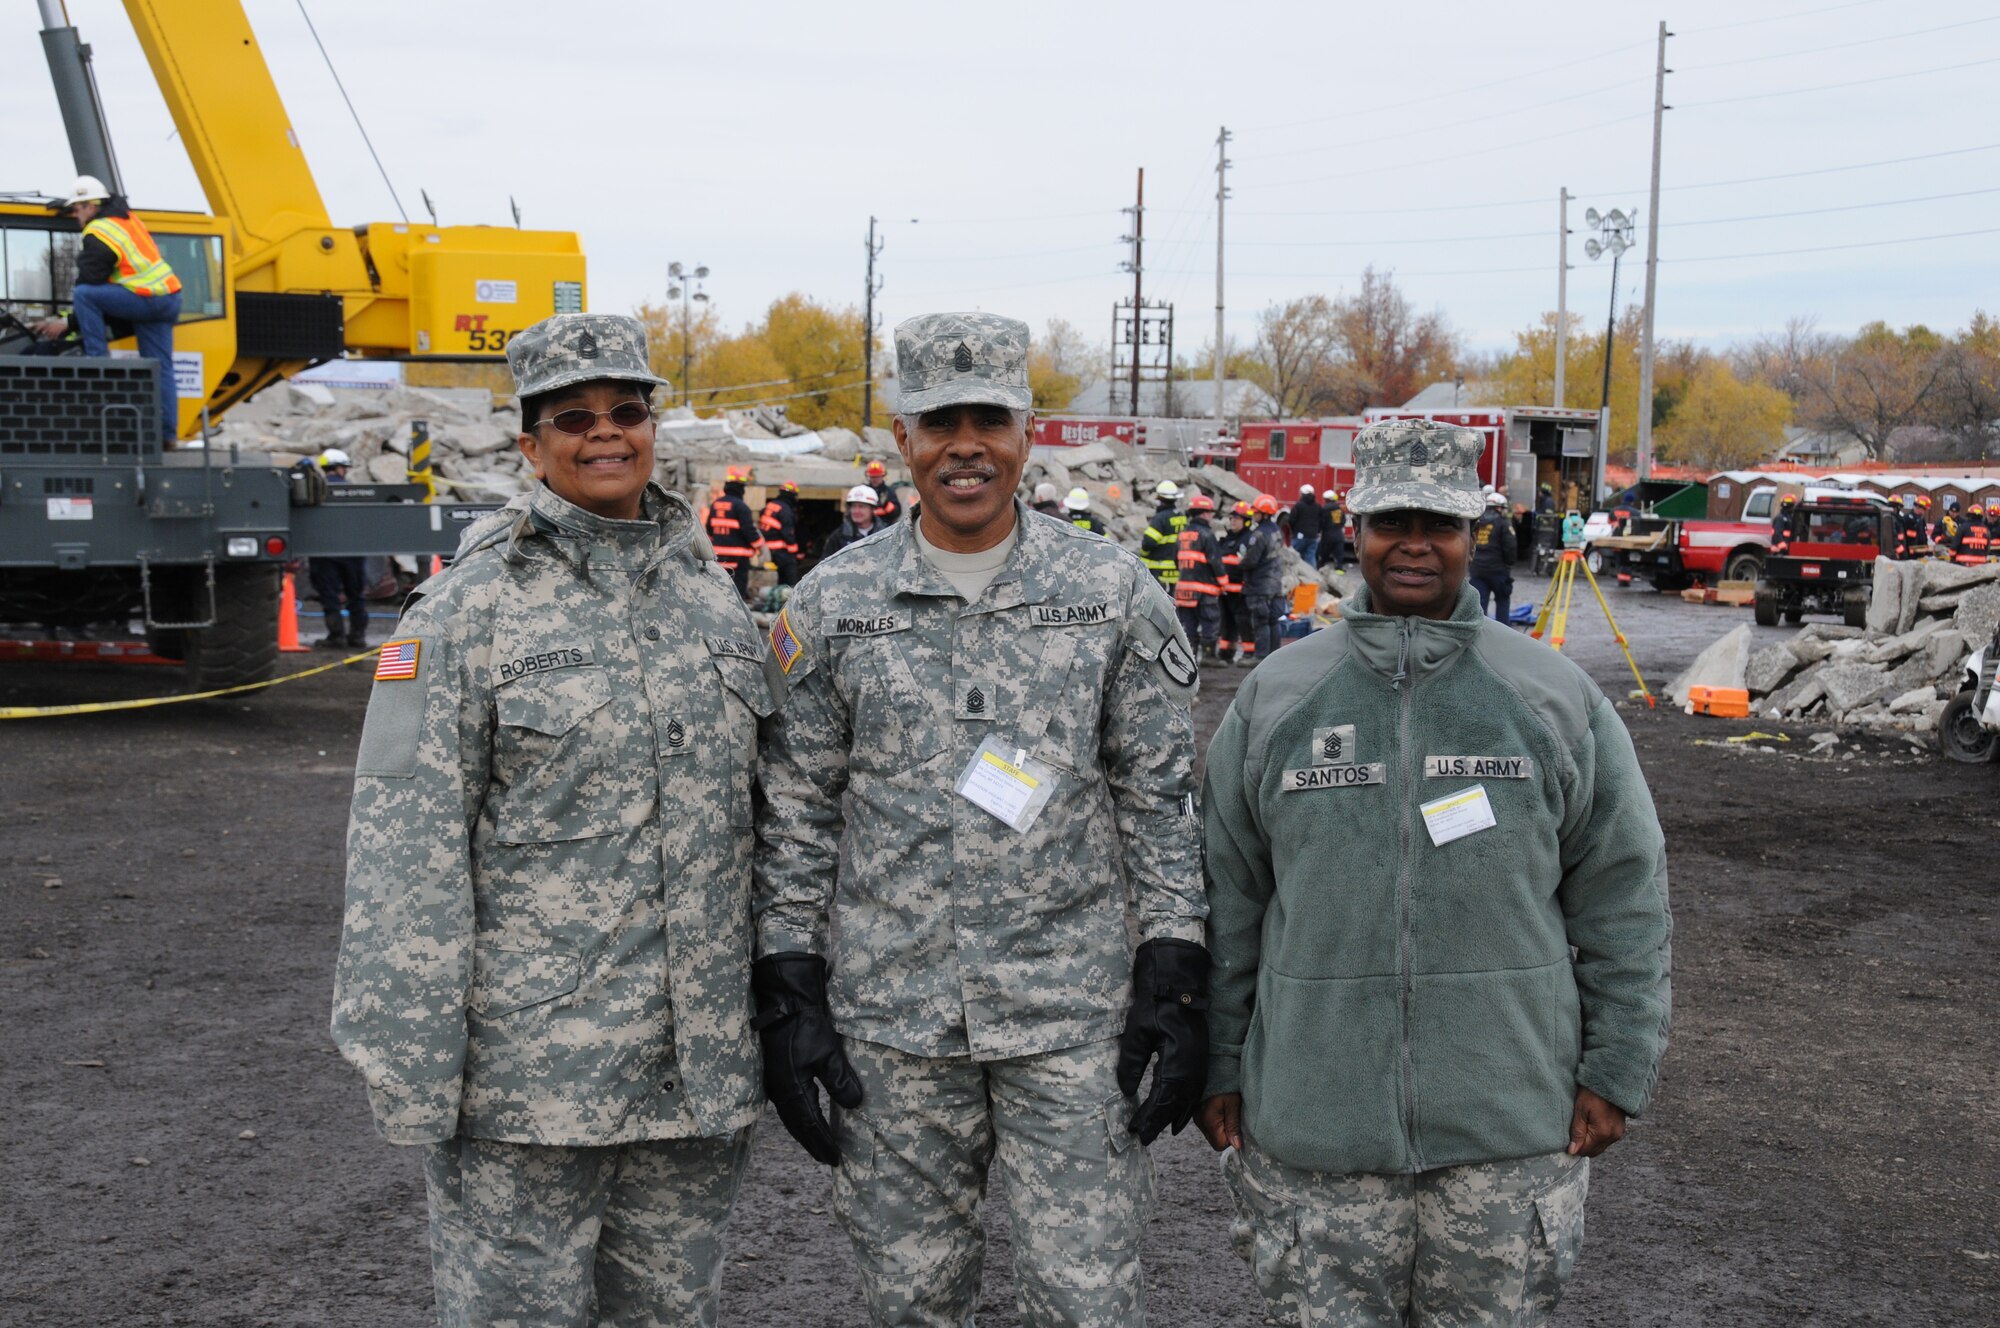 (Left to right) Master Sgt. Myrtle Roberts, Command Sgt. Maj. Pedro Morales and Maj. Eugenie Santos traveled 1900 miles from the Virgin Islands to participate in the recent Vigilant Guard exercise.